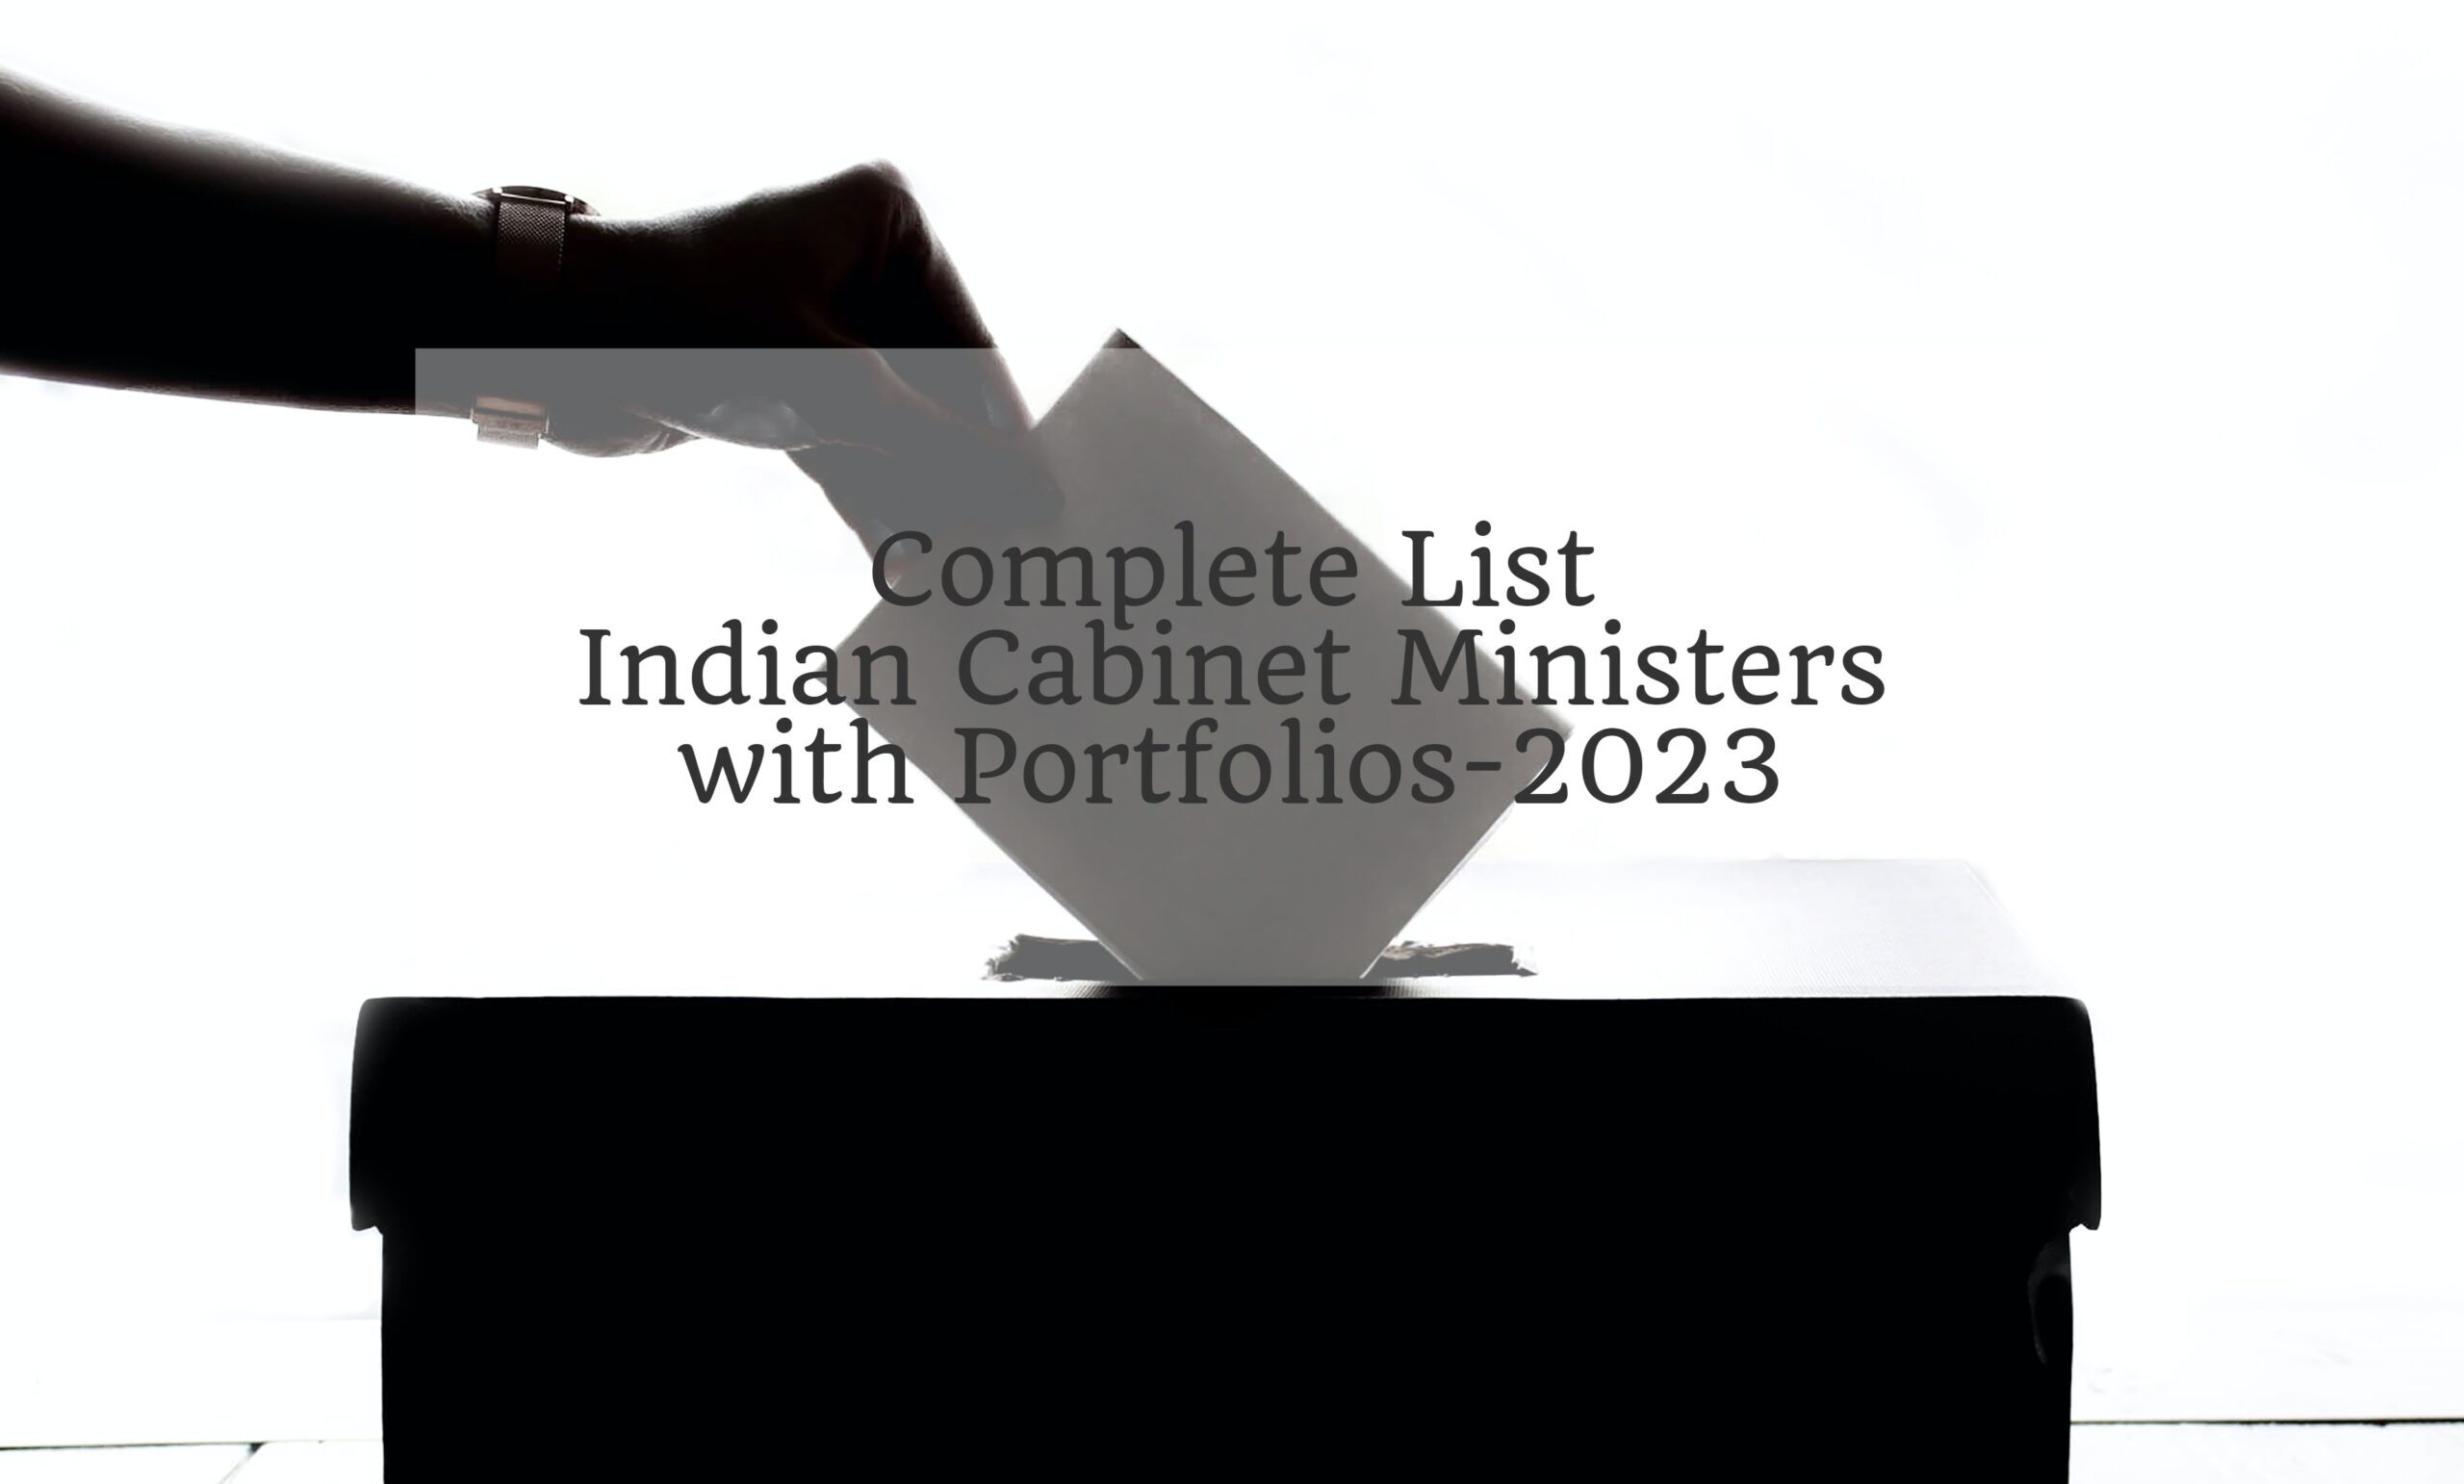 Complete List of Indian Cabinet Ministers with Portfolios-2023